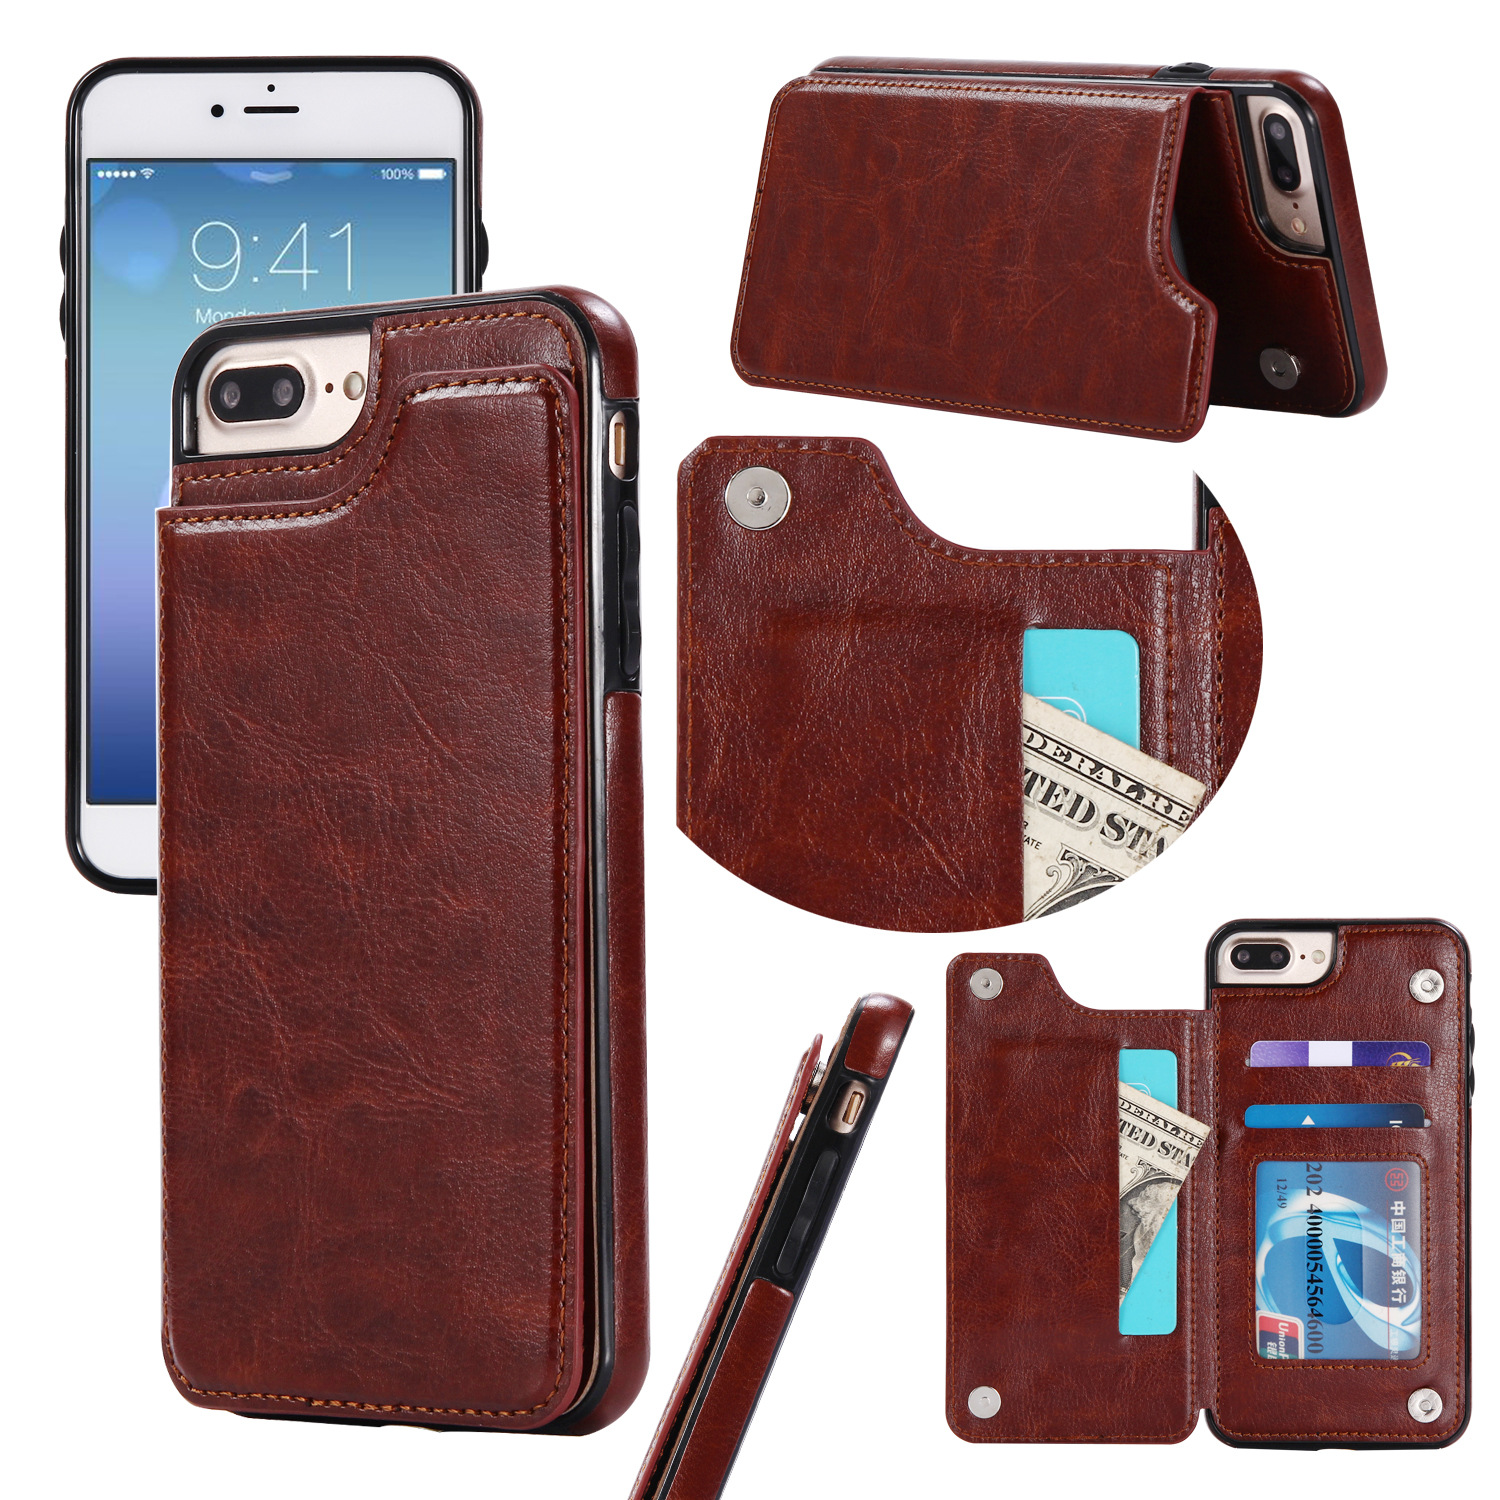 iPhone 8 Plus / 7 Plus Flip BOOK Leather Style Credit Card Case (Brown)